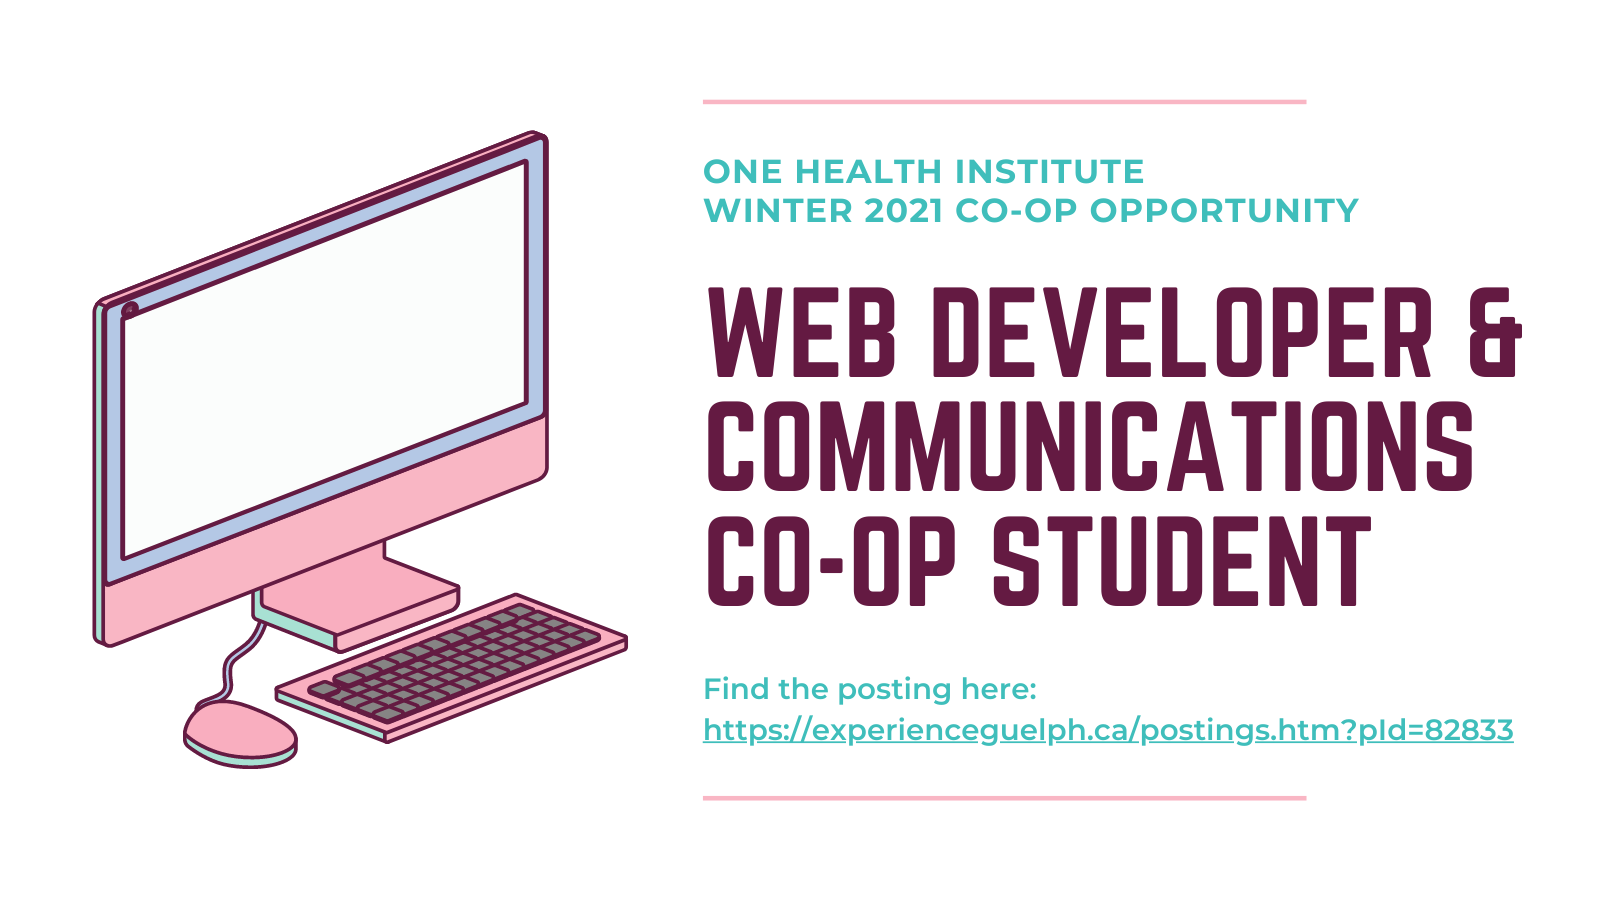 Banner announcing One Health Institute Winter 2021 Co-op Opportunity Web Development & Communications Co-op Student. Find posting here: https://experienceguelph.ca/postings.htm?pId=82833 Graphic of computer monitor, mouse, and keyboard. 